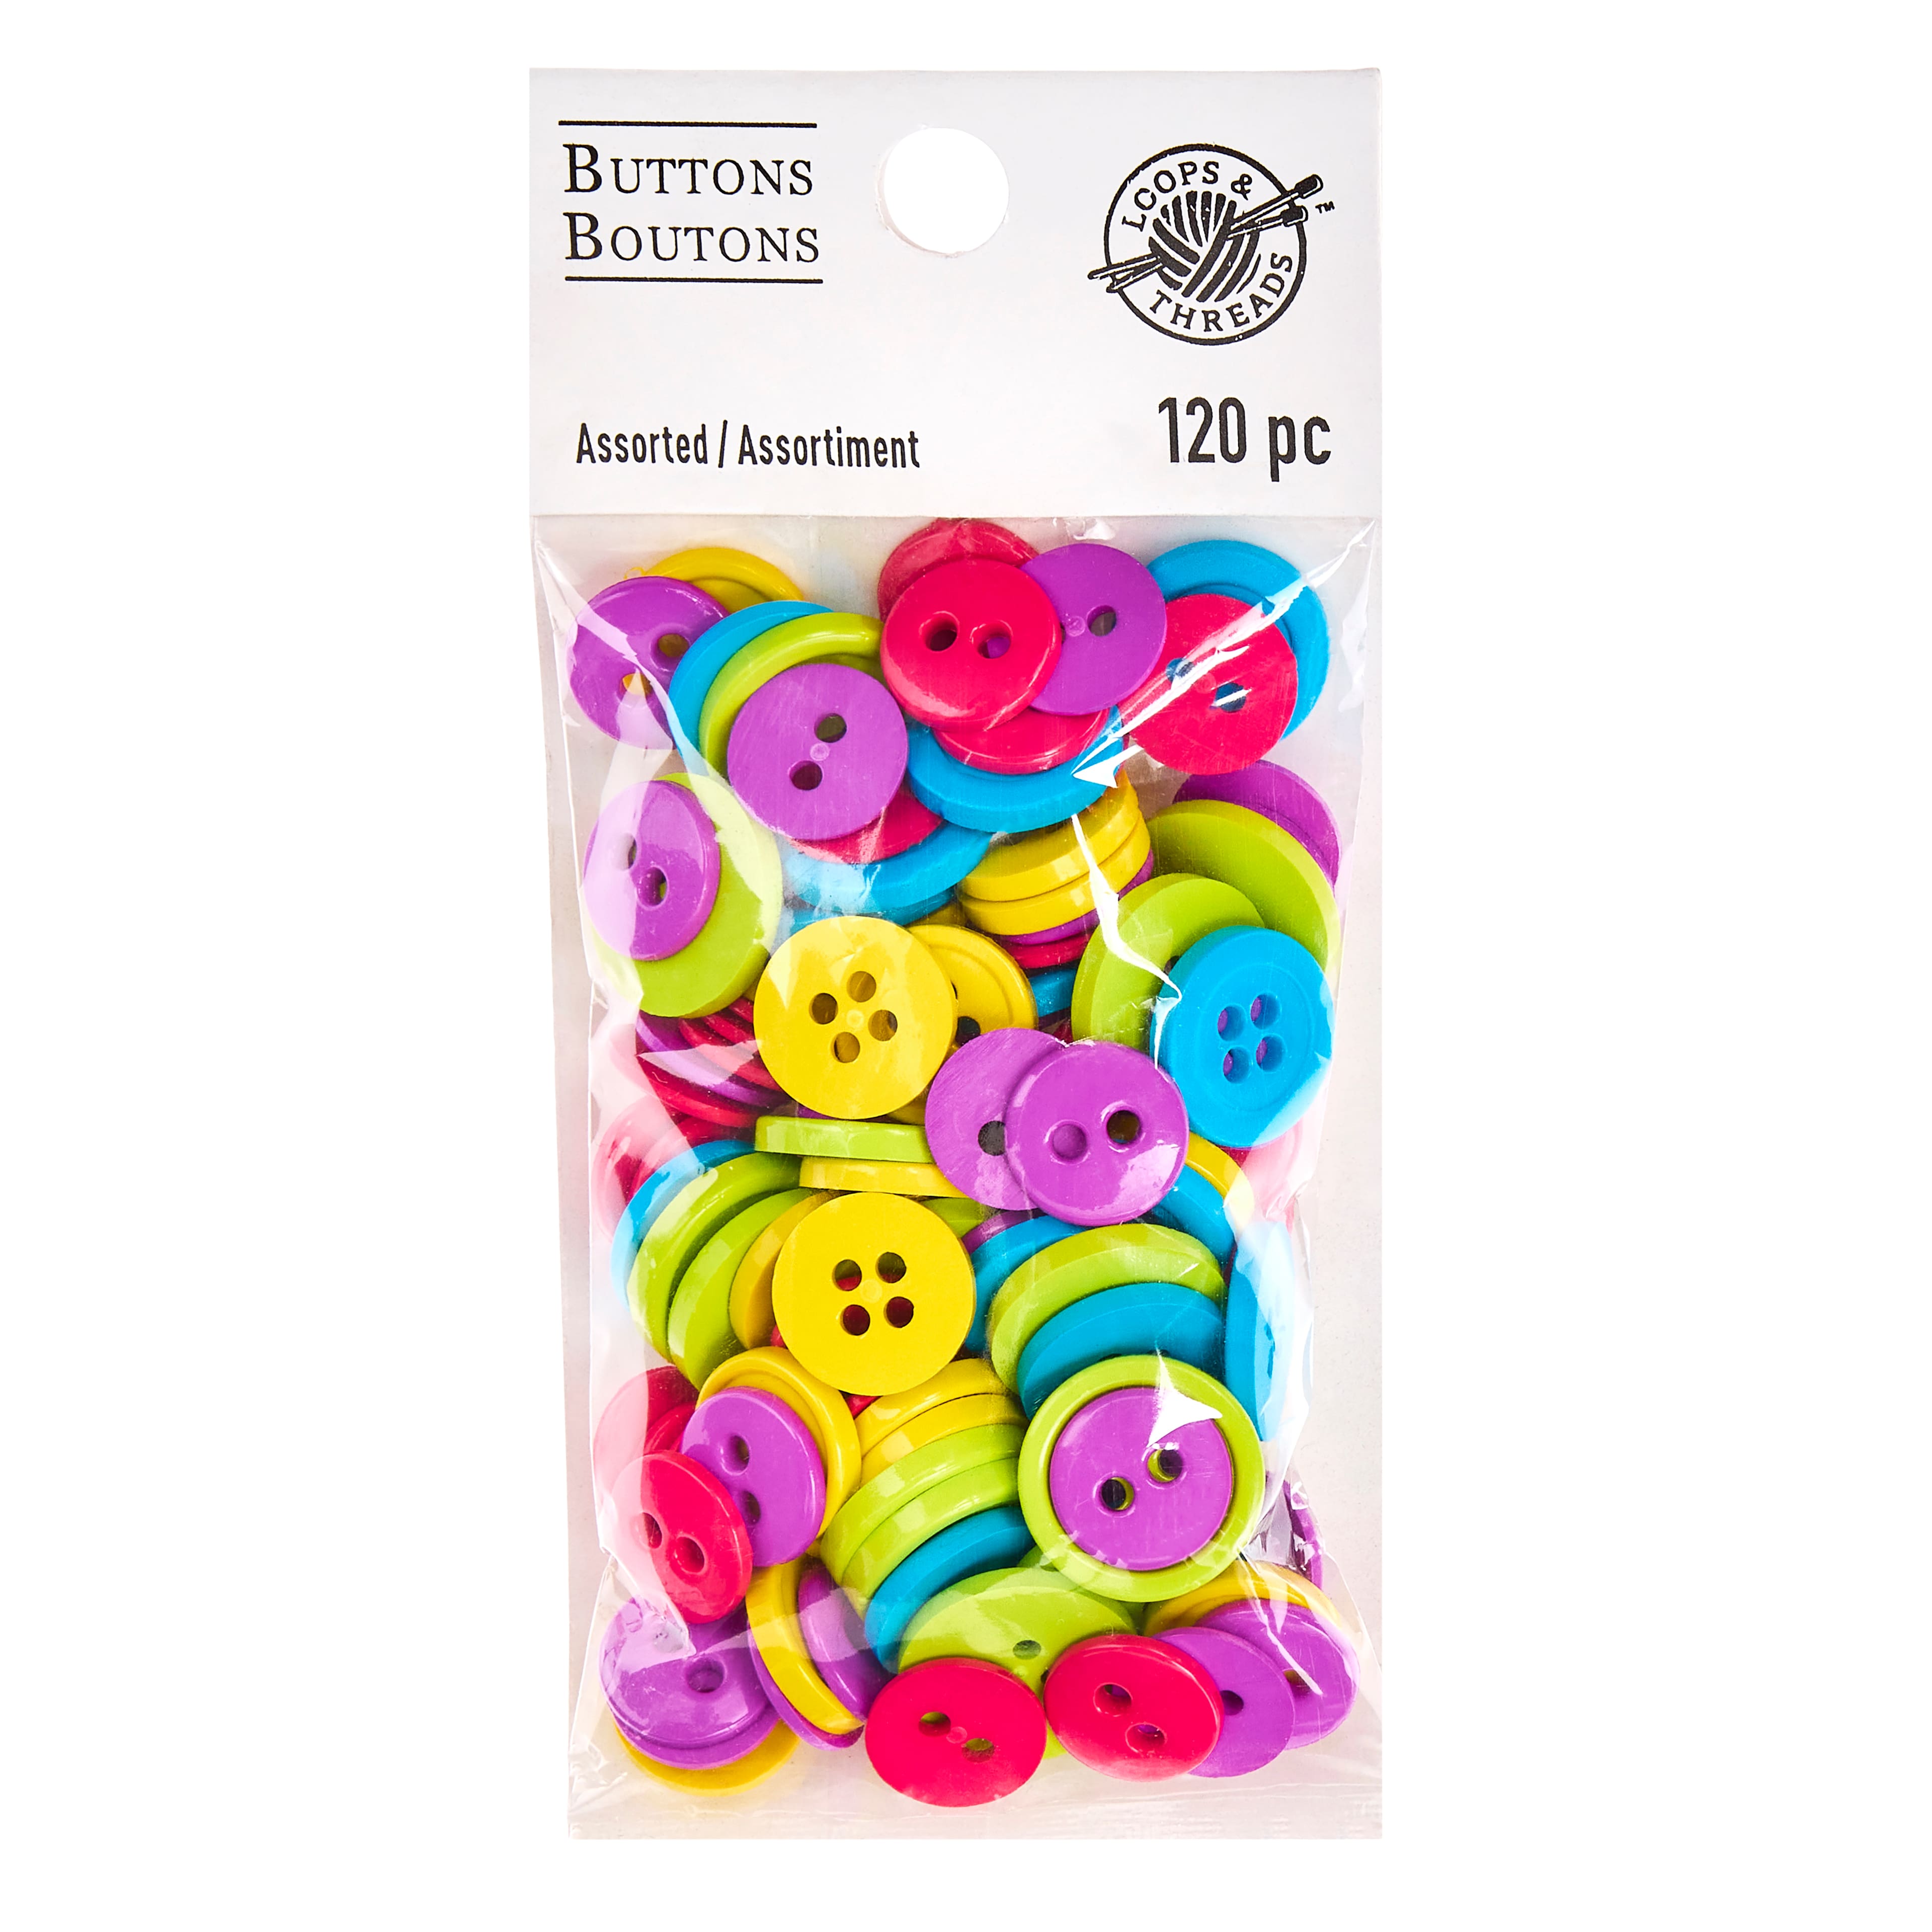 Blumenthal Lansing Favorite Findings™ Clean Big Buttons, Multicolor